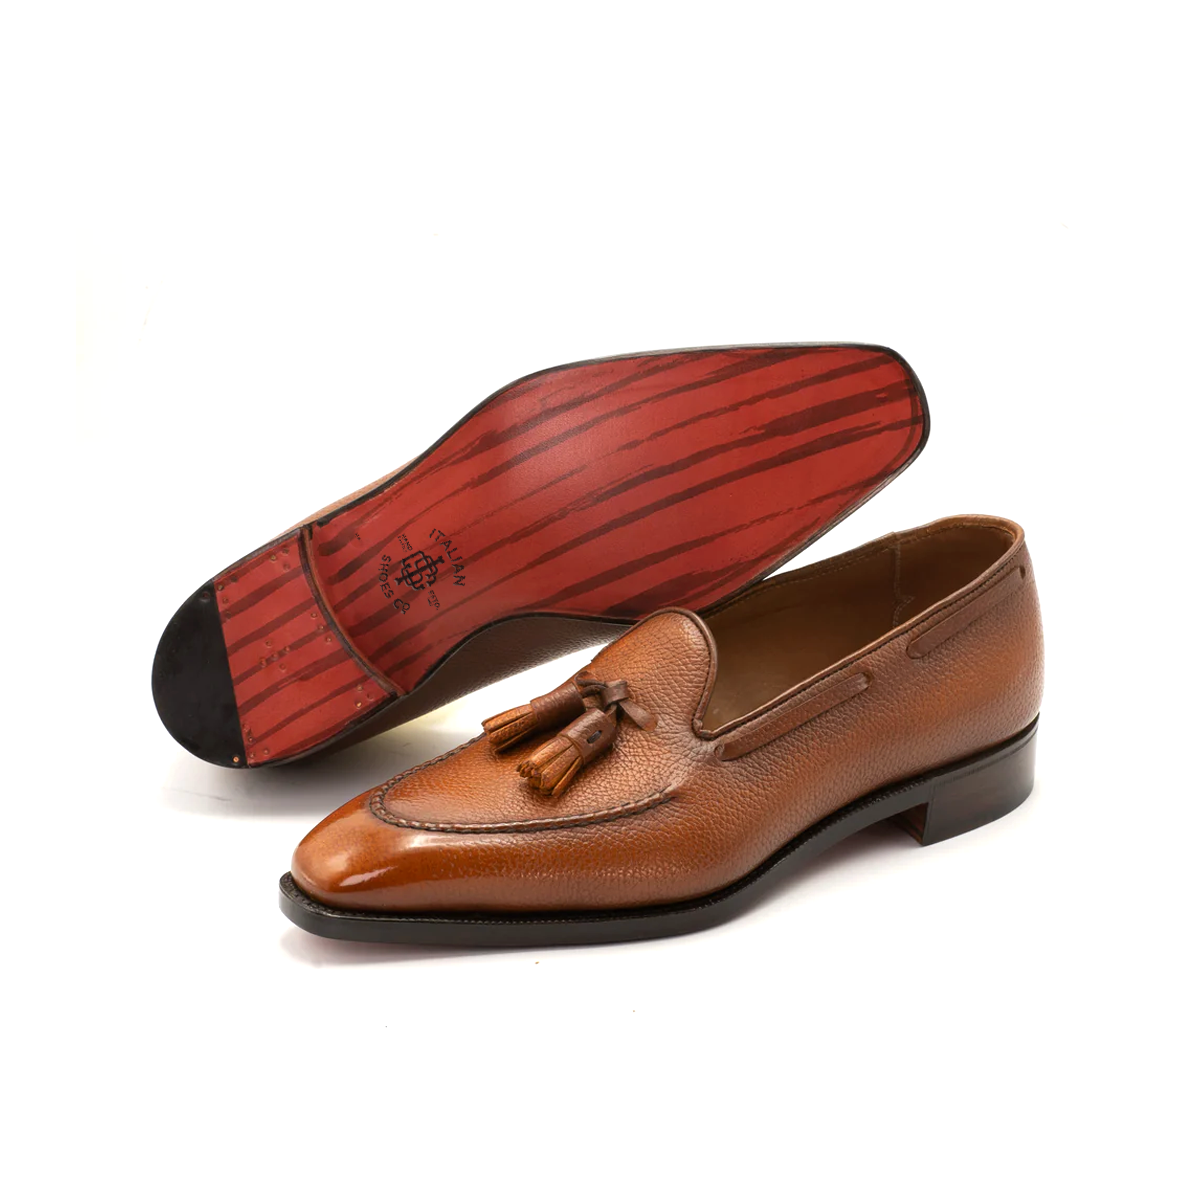 Sybil Compton Loafers